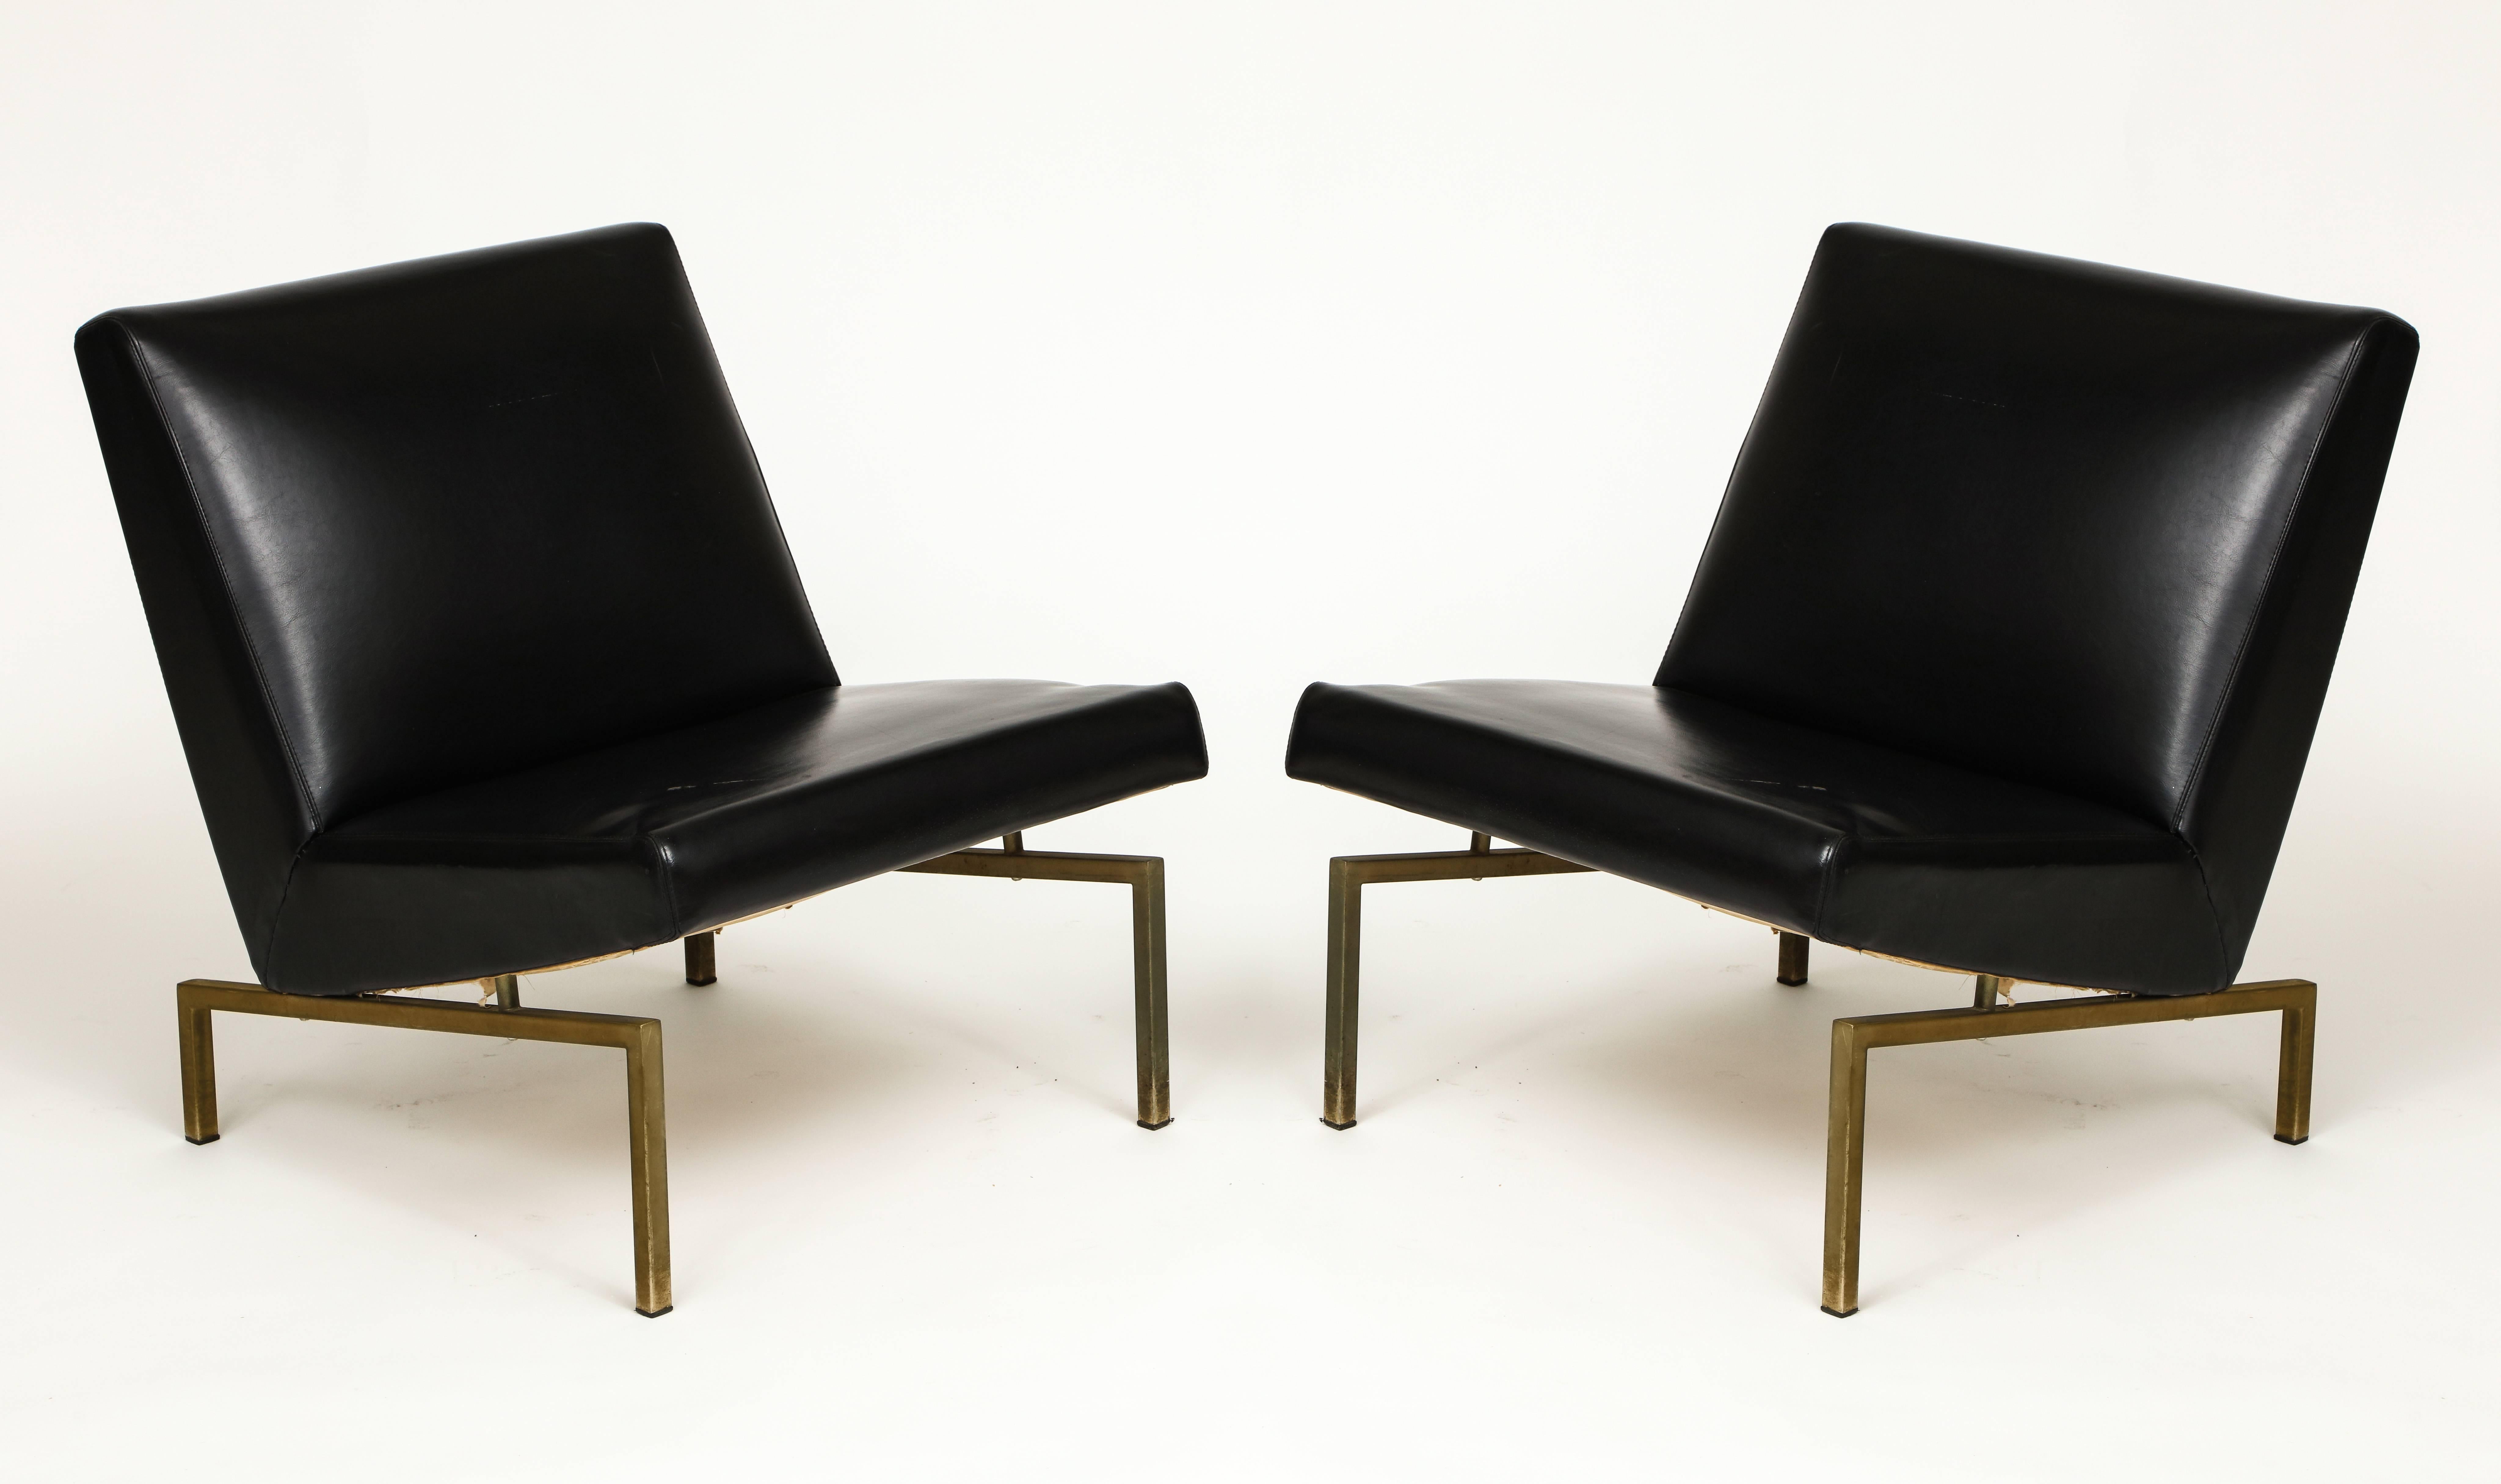 Joseph Andre Motte black tempo pair lounge chairs brass Mid-Century, France.

Faux leather black chairs with brass base lounge chairs by Joseph Andre Motte. Sculptural shape. Edited by Steiner.

Measures: Height: 27.
Width: 22.5.
Depth: 27.
Seat